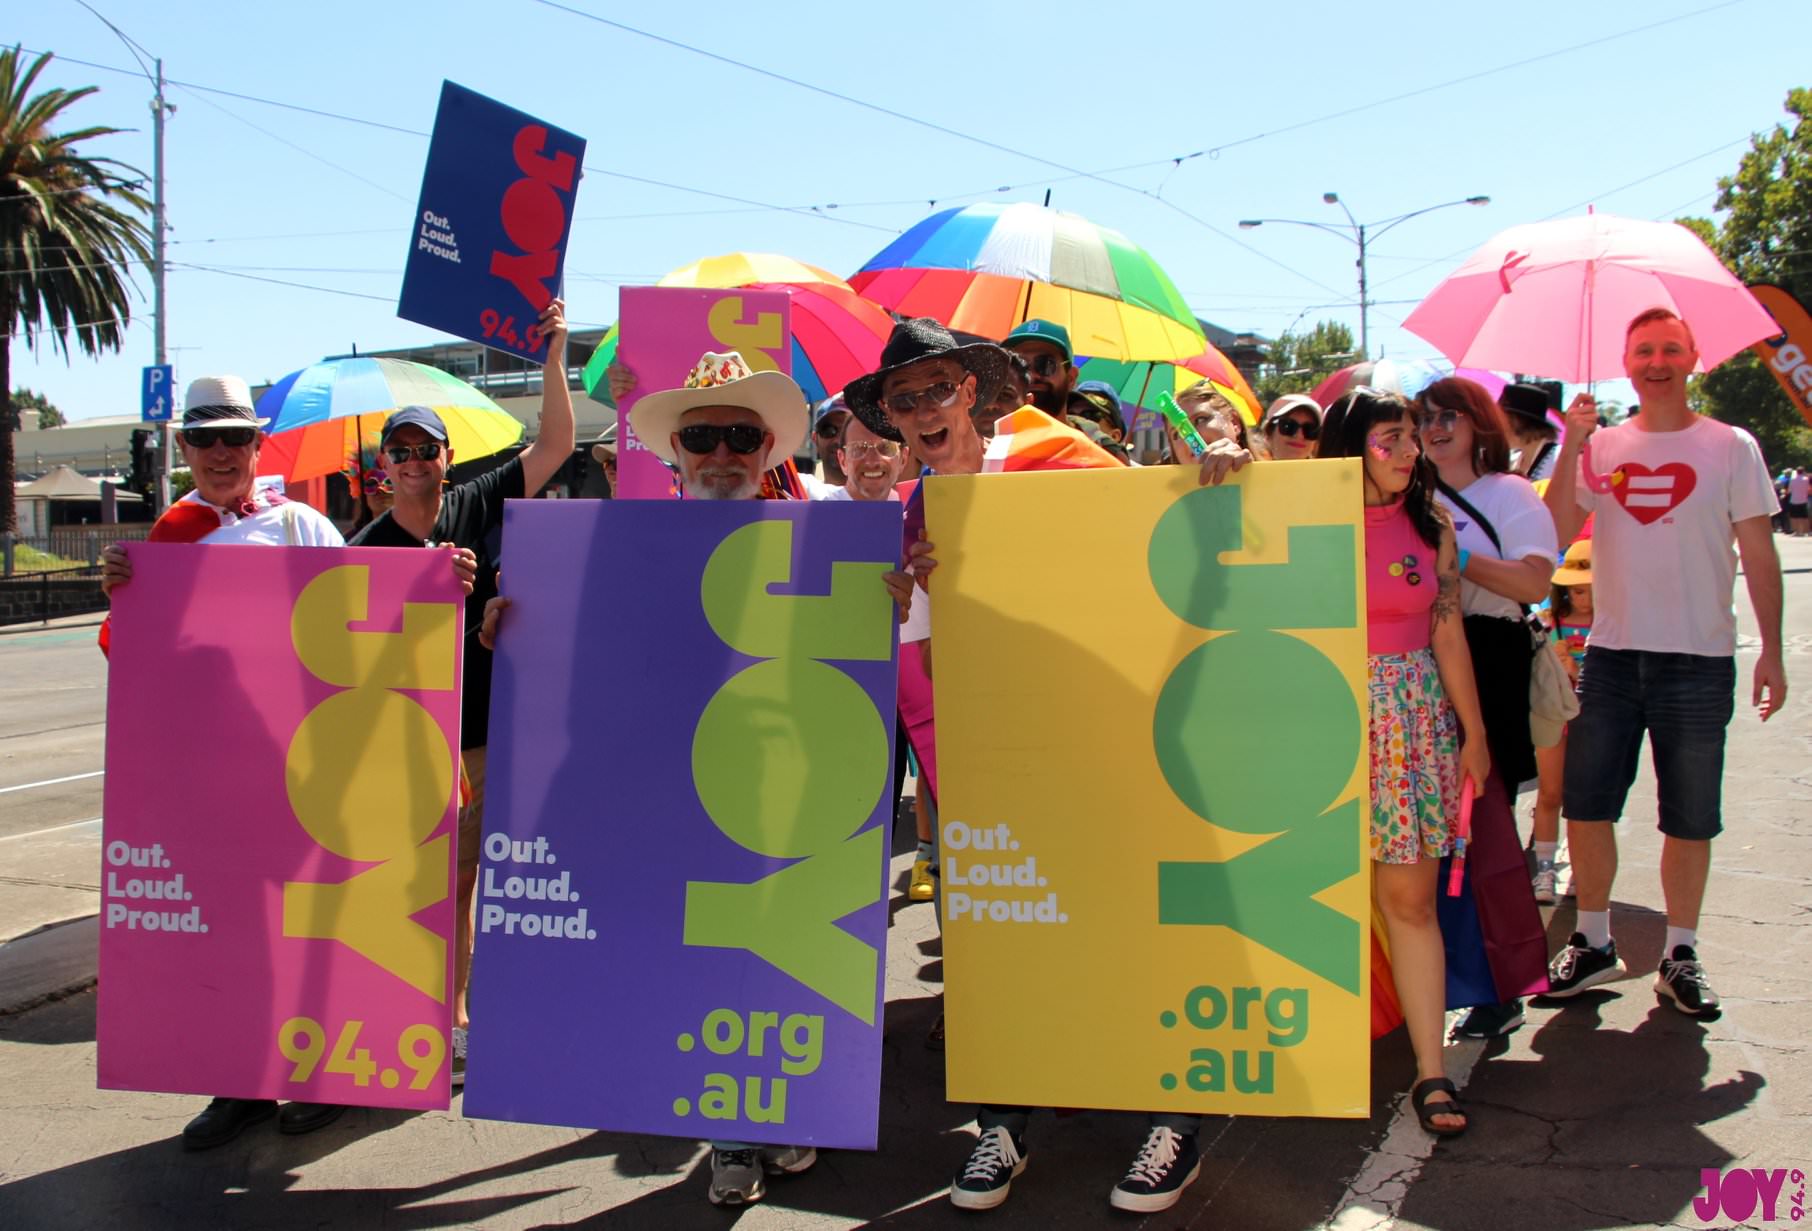 JOY Presenters and volunteers marching together at Pride March 2019